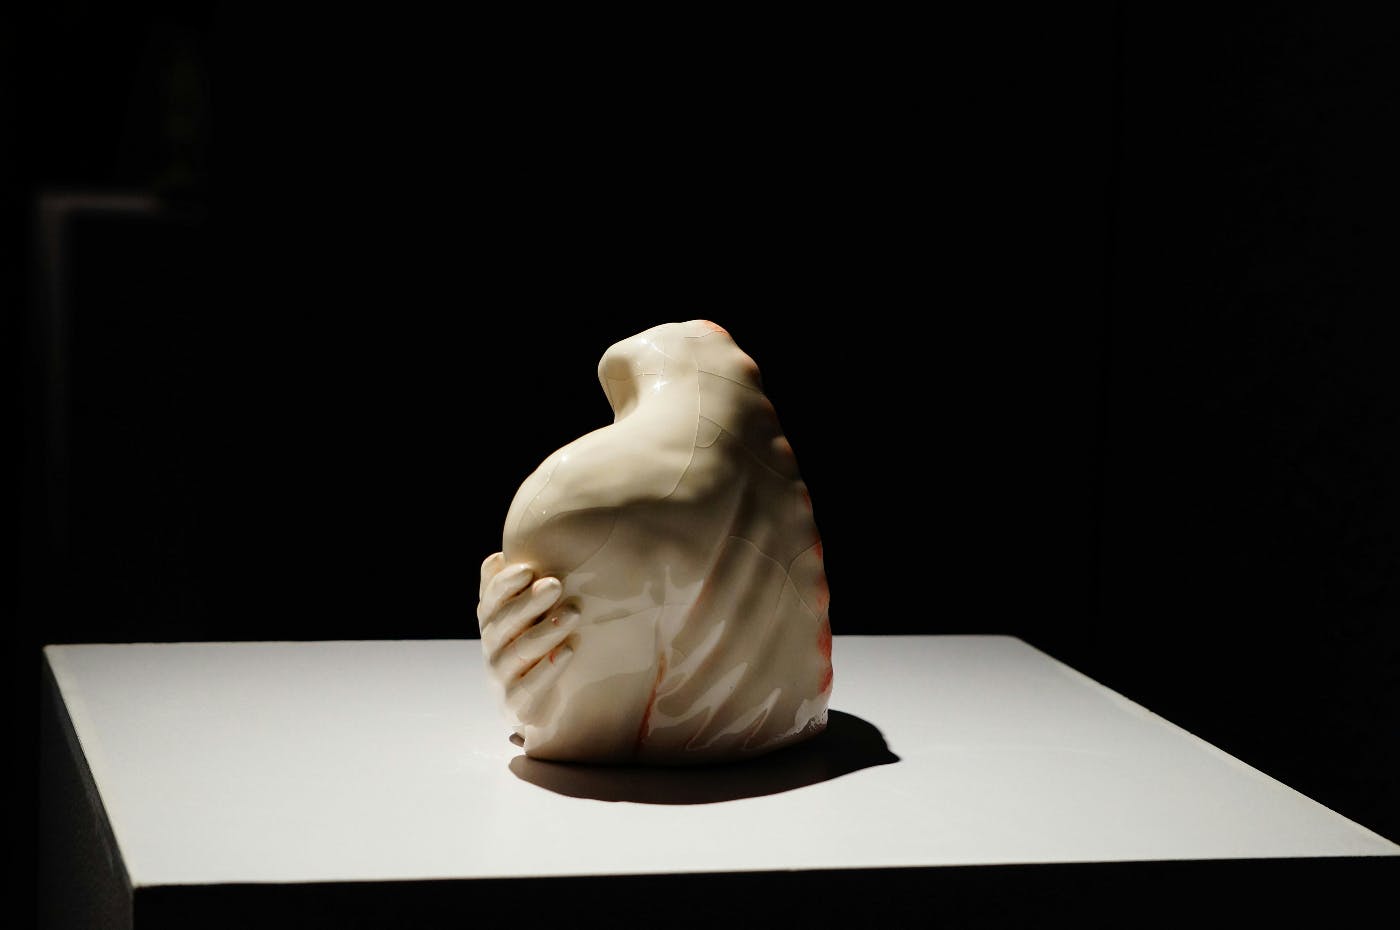 A White sculptor symbolizing and embrace on a white table with black background